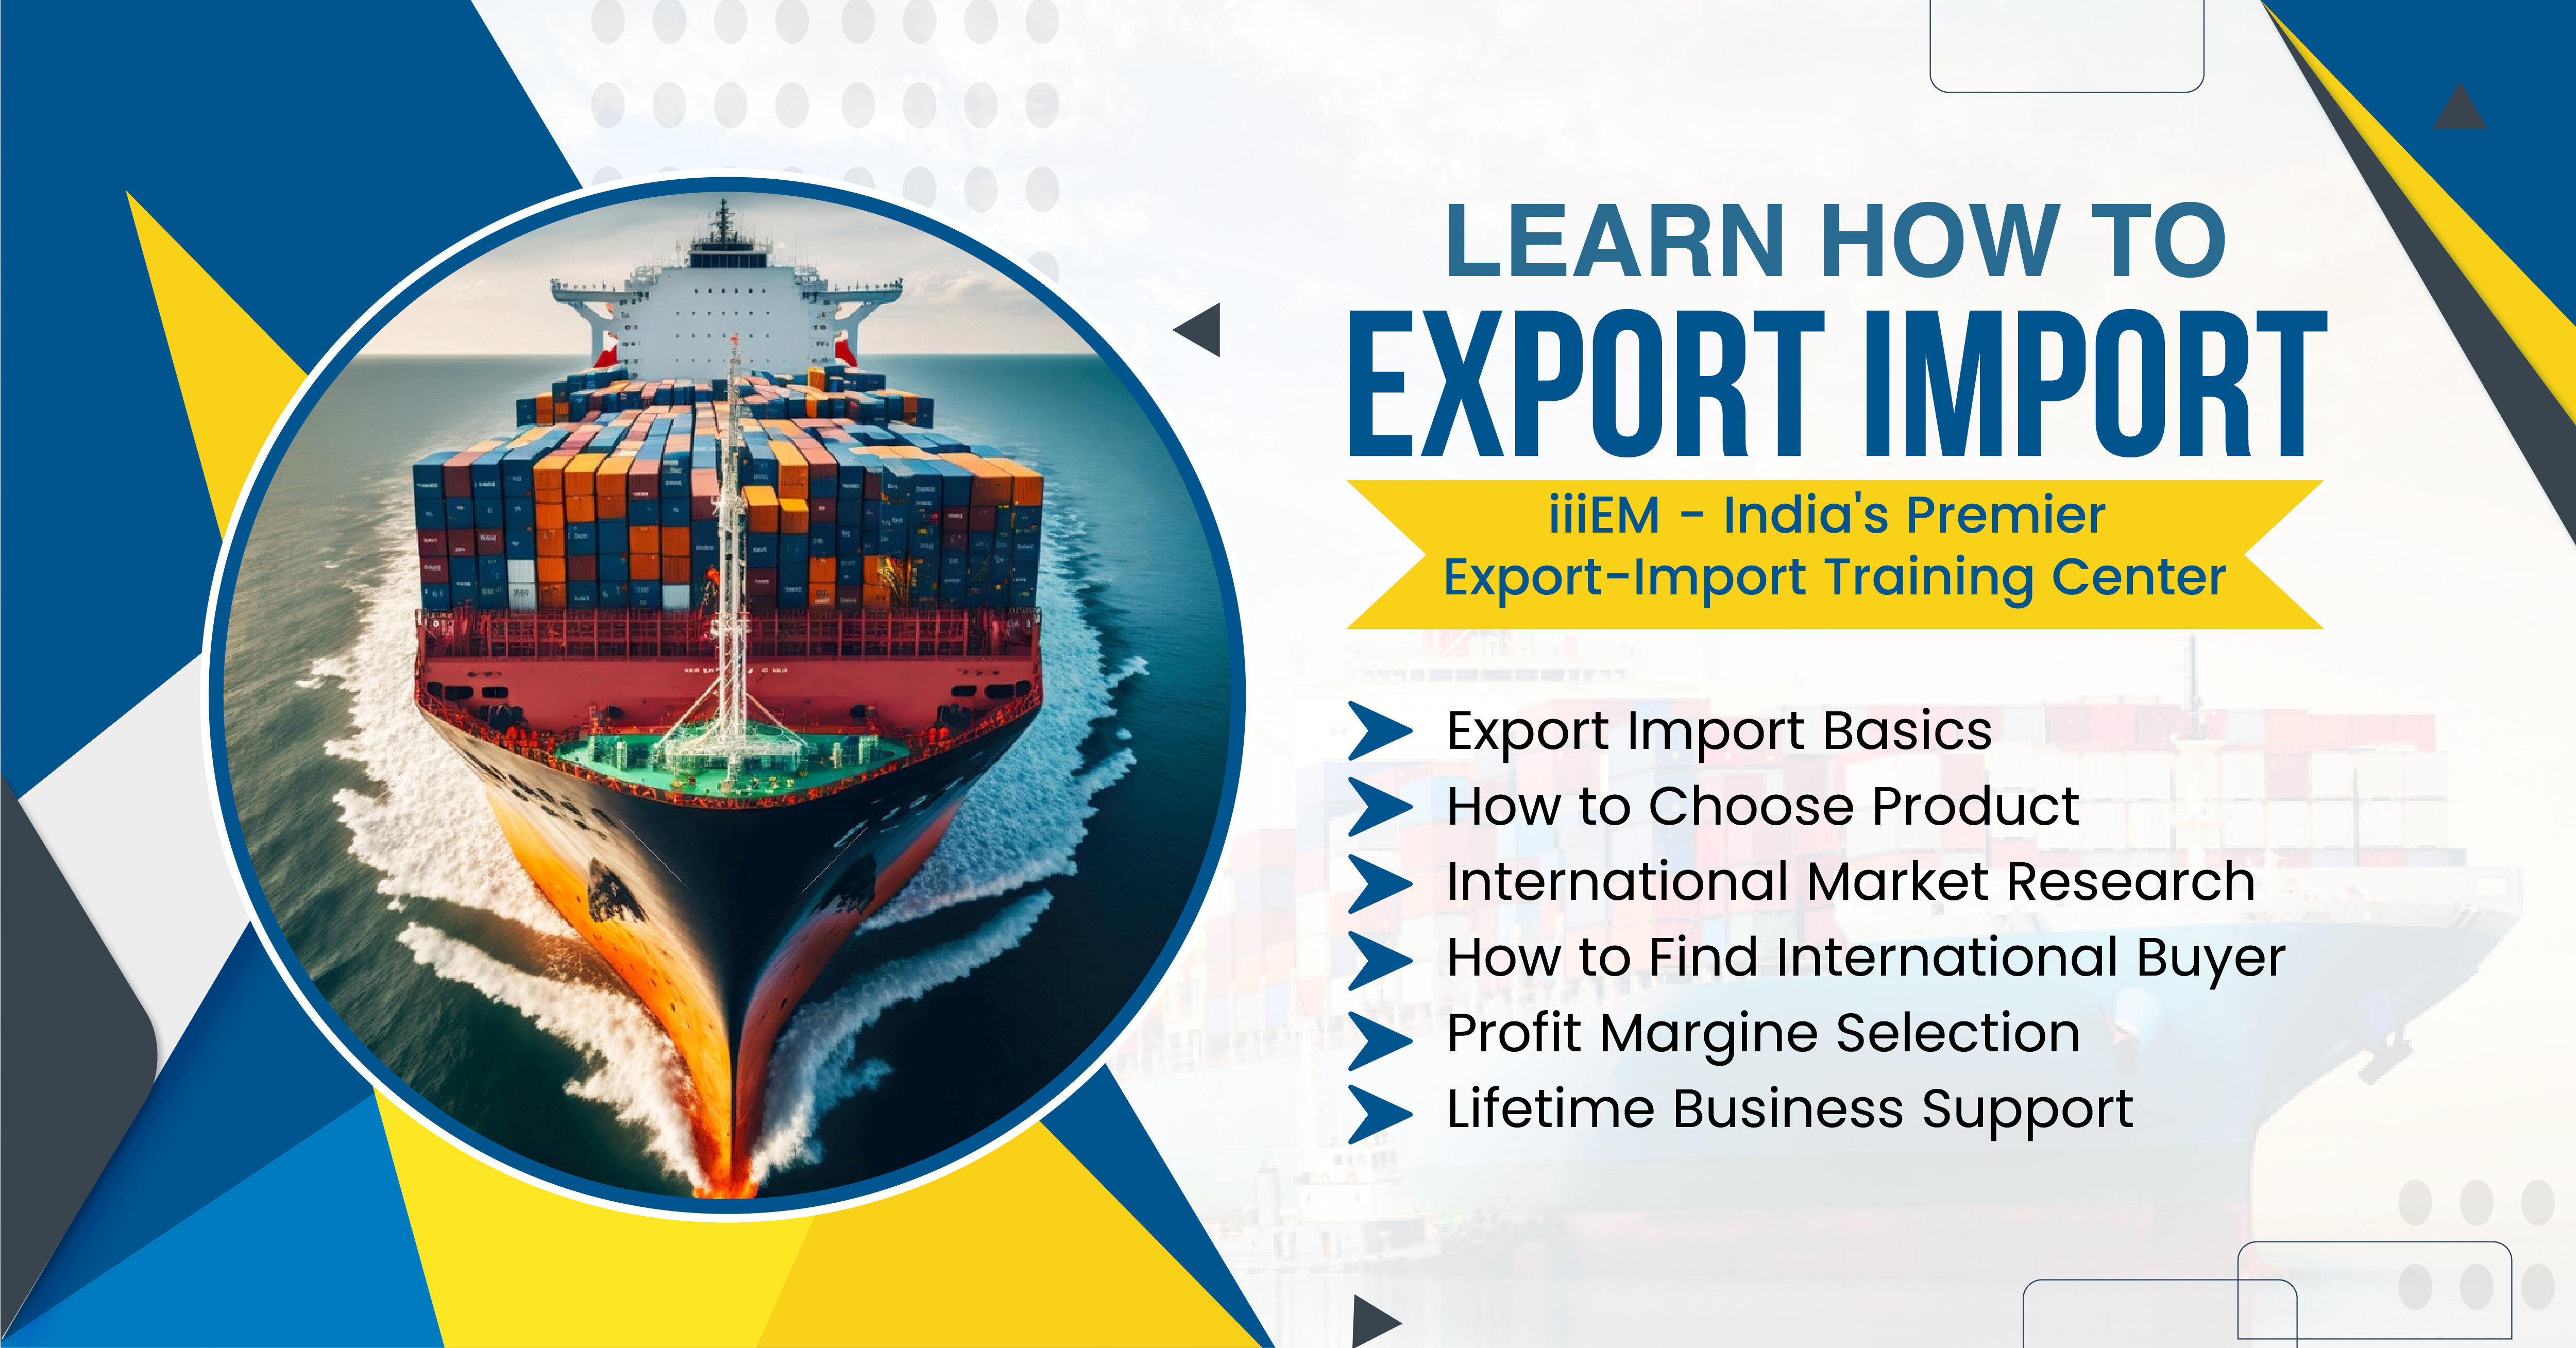 Enroll Now! Learn How to Export-Import with Certified Course Training in Indore, Indore, Madhya Pradesh, India